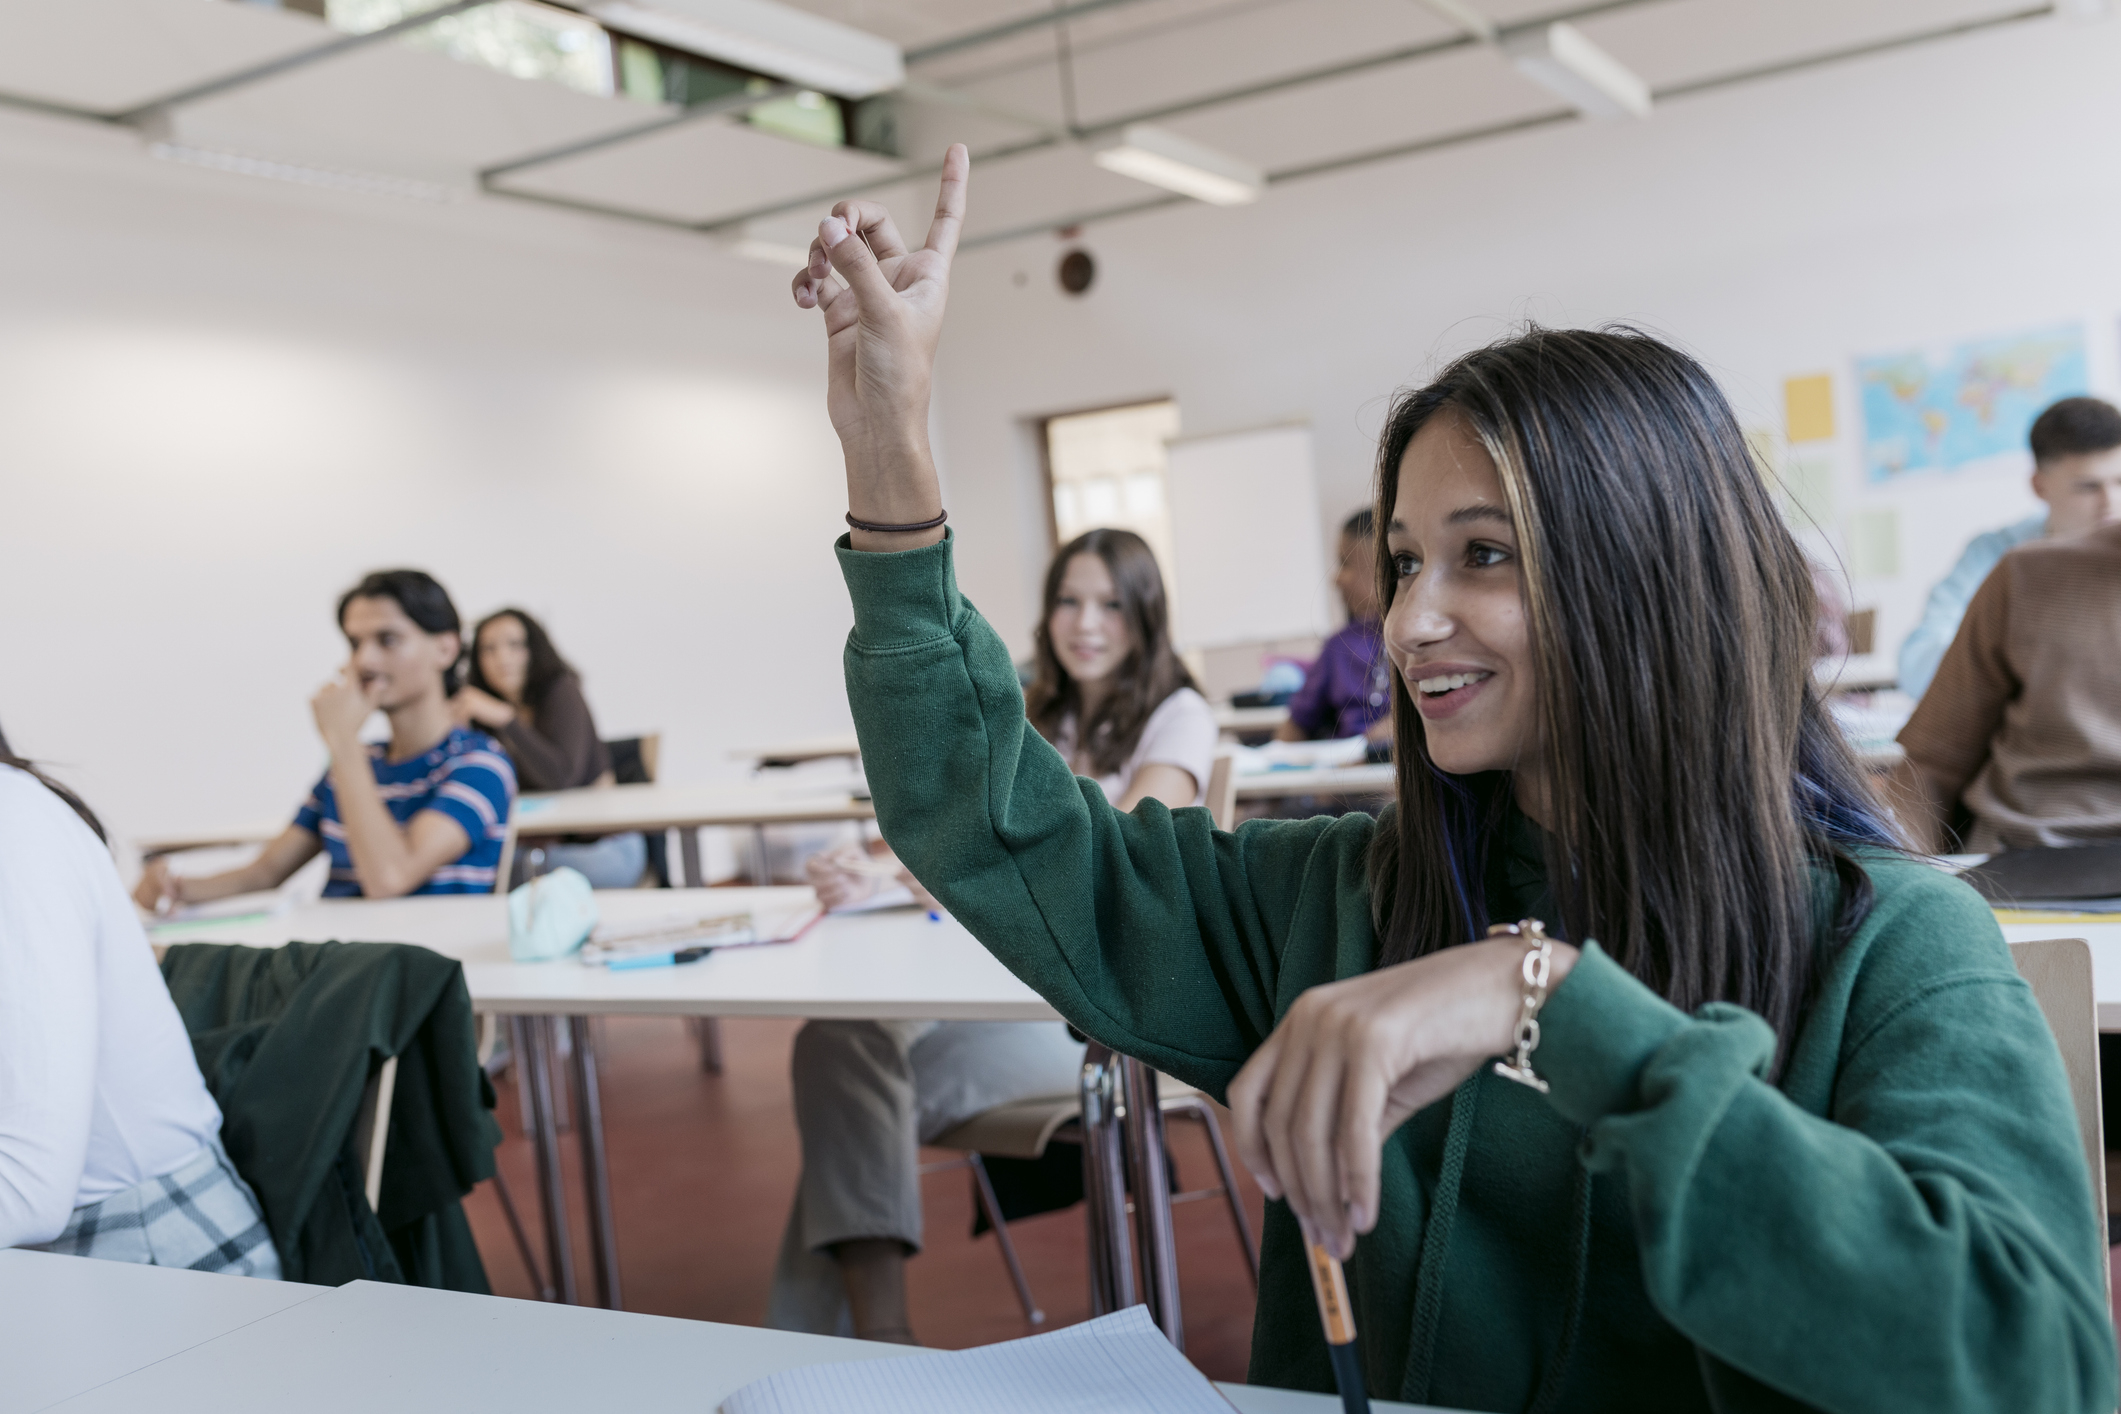 Student raises hand in classroom with peers, engaging with the teacher off-camera